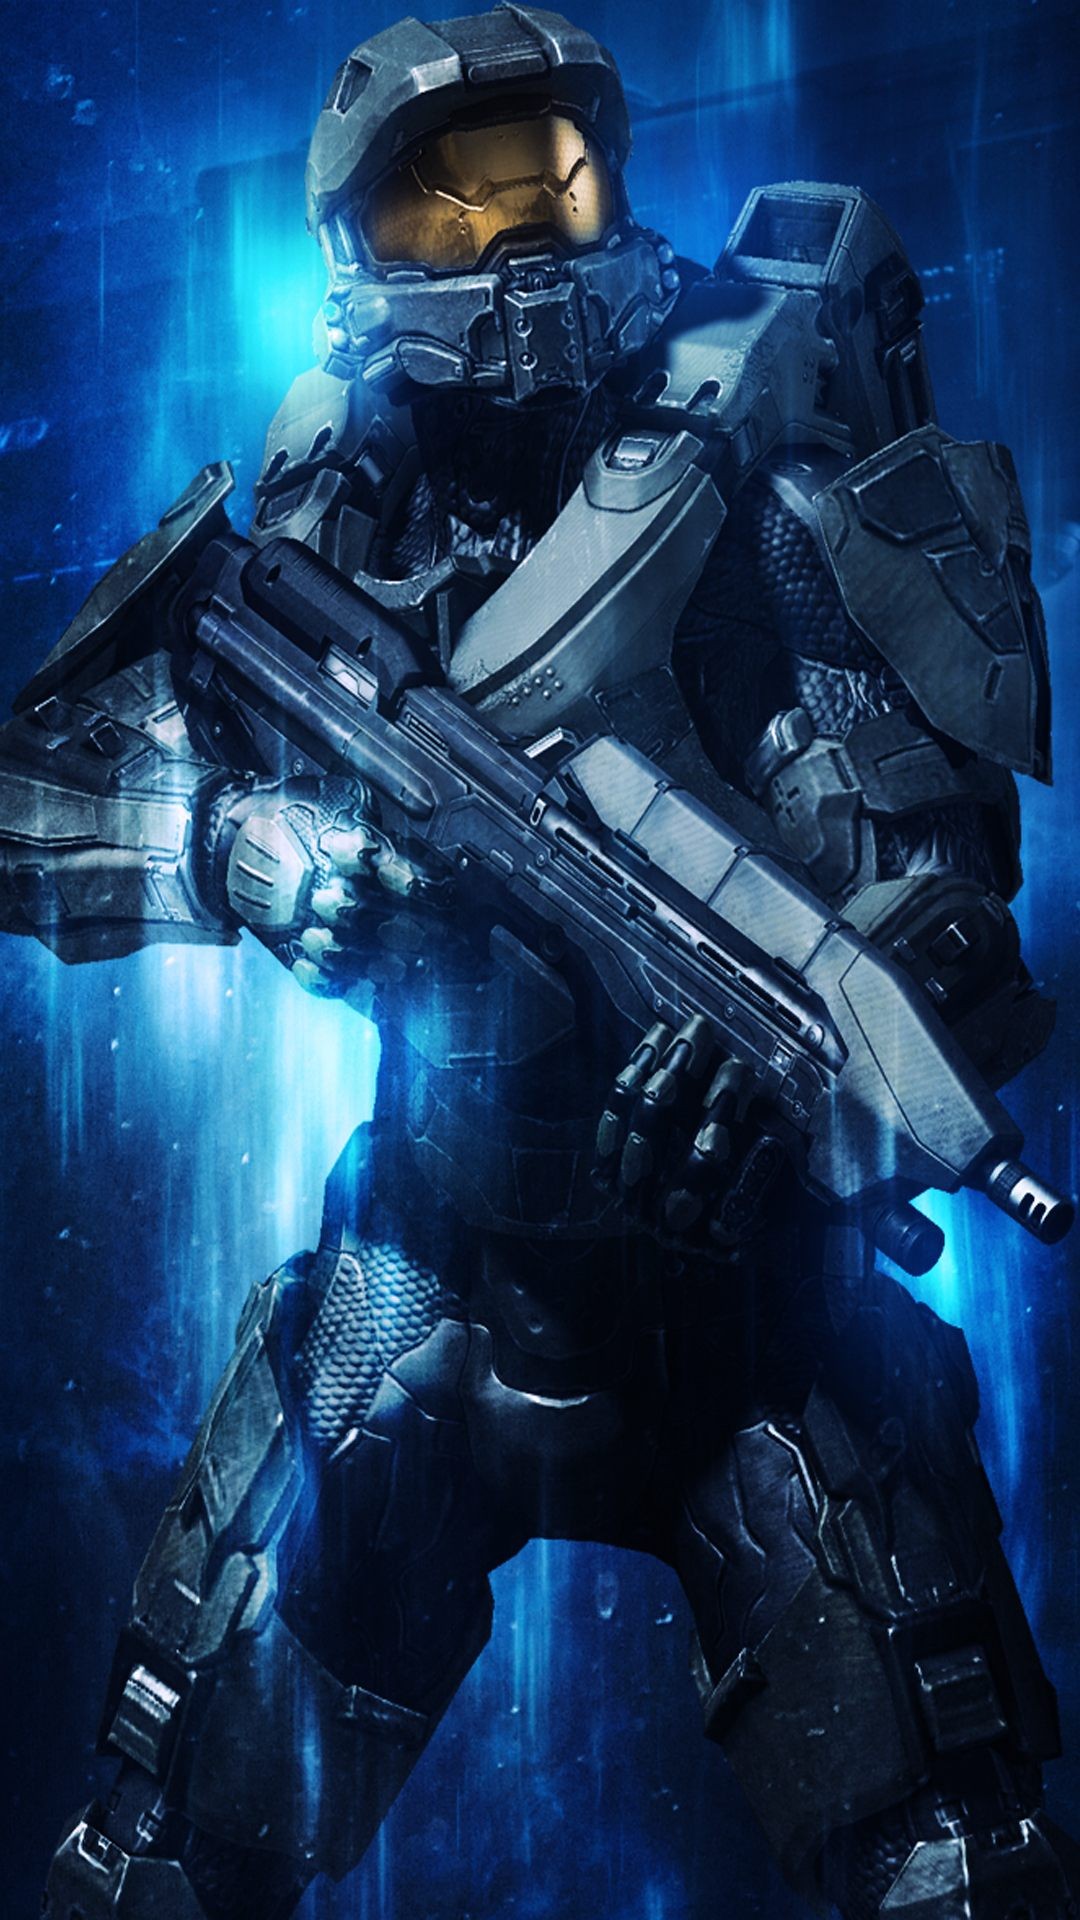 halo iphone wallpaper,action adventure game,cg artwork,fictional character,games,action figure